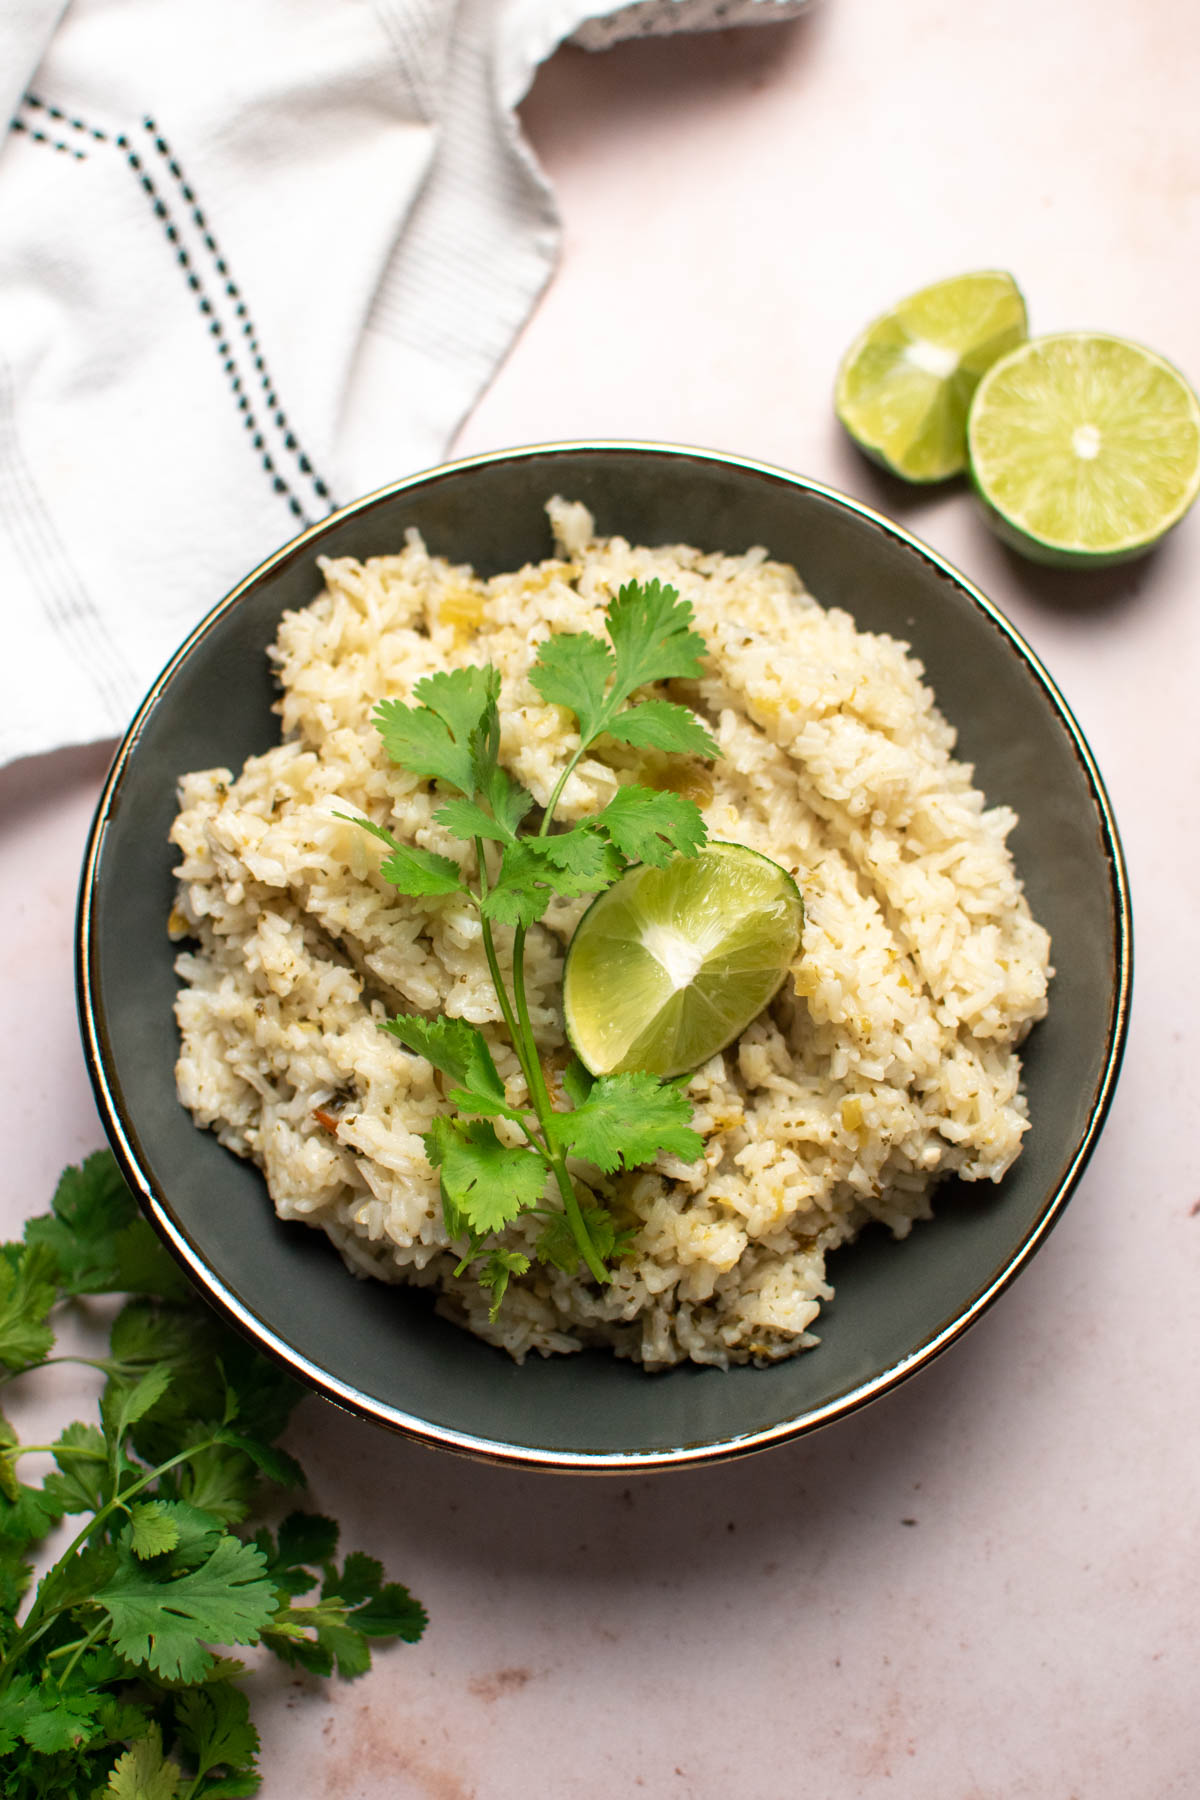 Gray bowl of cilantro lime rice on table with limes and fresh cilantro nearby.